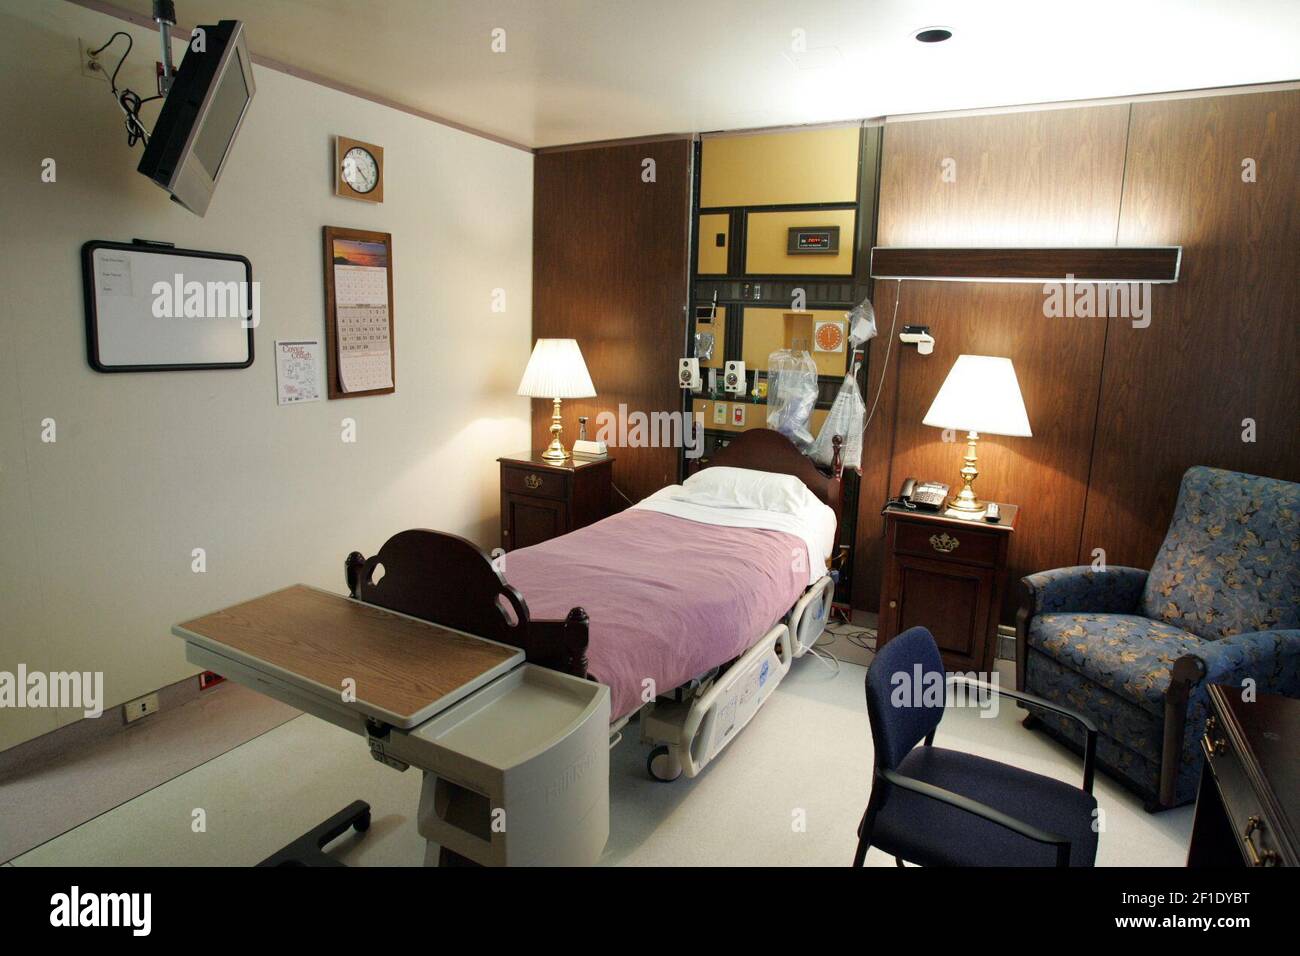 March 15, 2007; Washington, DC, USA; The VIP treatment ward at Walter Reed Army Medical Hospital, referred to there as Ward 71. It consists of six patient rooms, one of which is in the Presidential Suite. The Suite is intended for use by General officers and Cabinet level government officials. This is the bed area of the General patient's room. Mandatory Credit: Tim Dillon-USA TODAY/Sipa USA Stock Photo